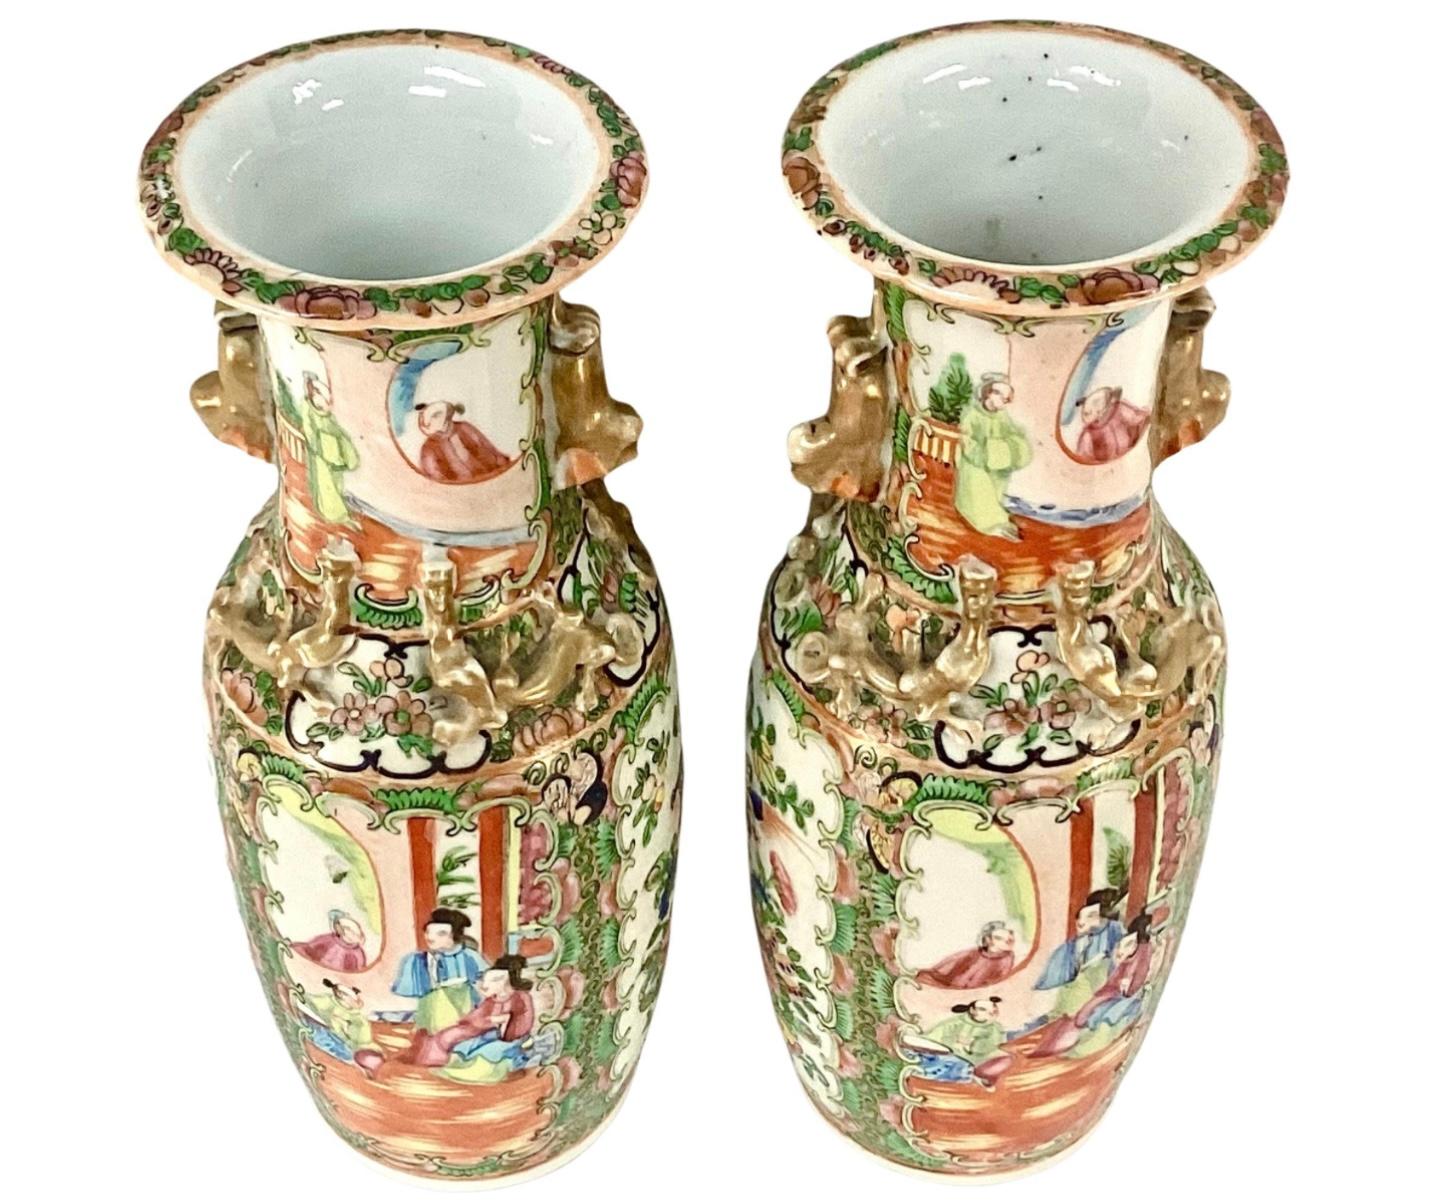 Pair of 19th century Chinese Export famille rose medallion porcelain vases. Colors include pink, blue and green on white background with gold trim. Striking pair of vases with bright vivid colors.